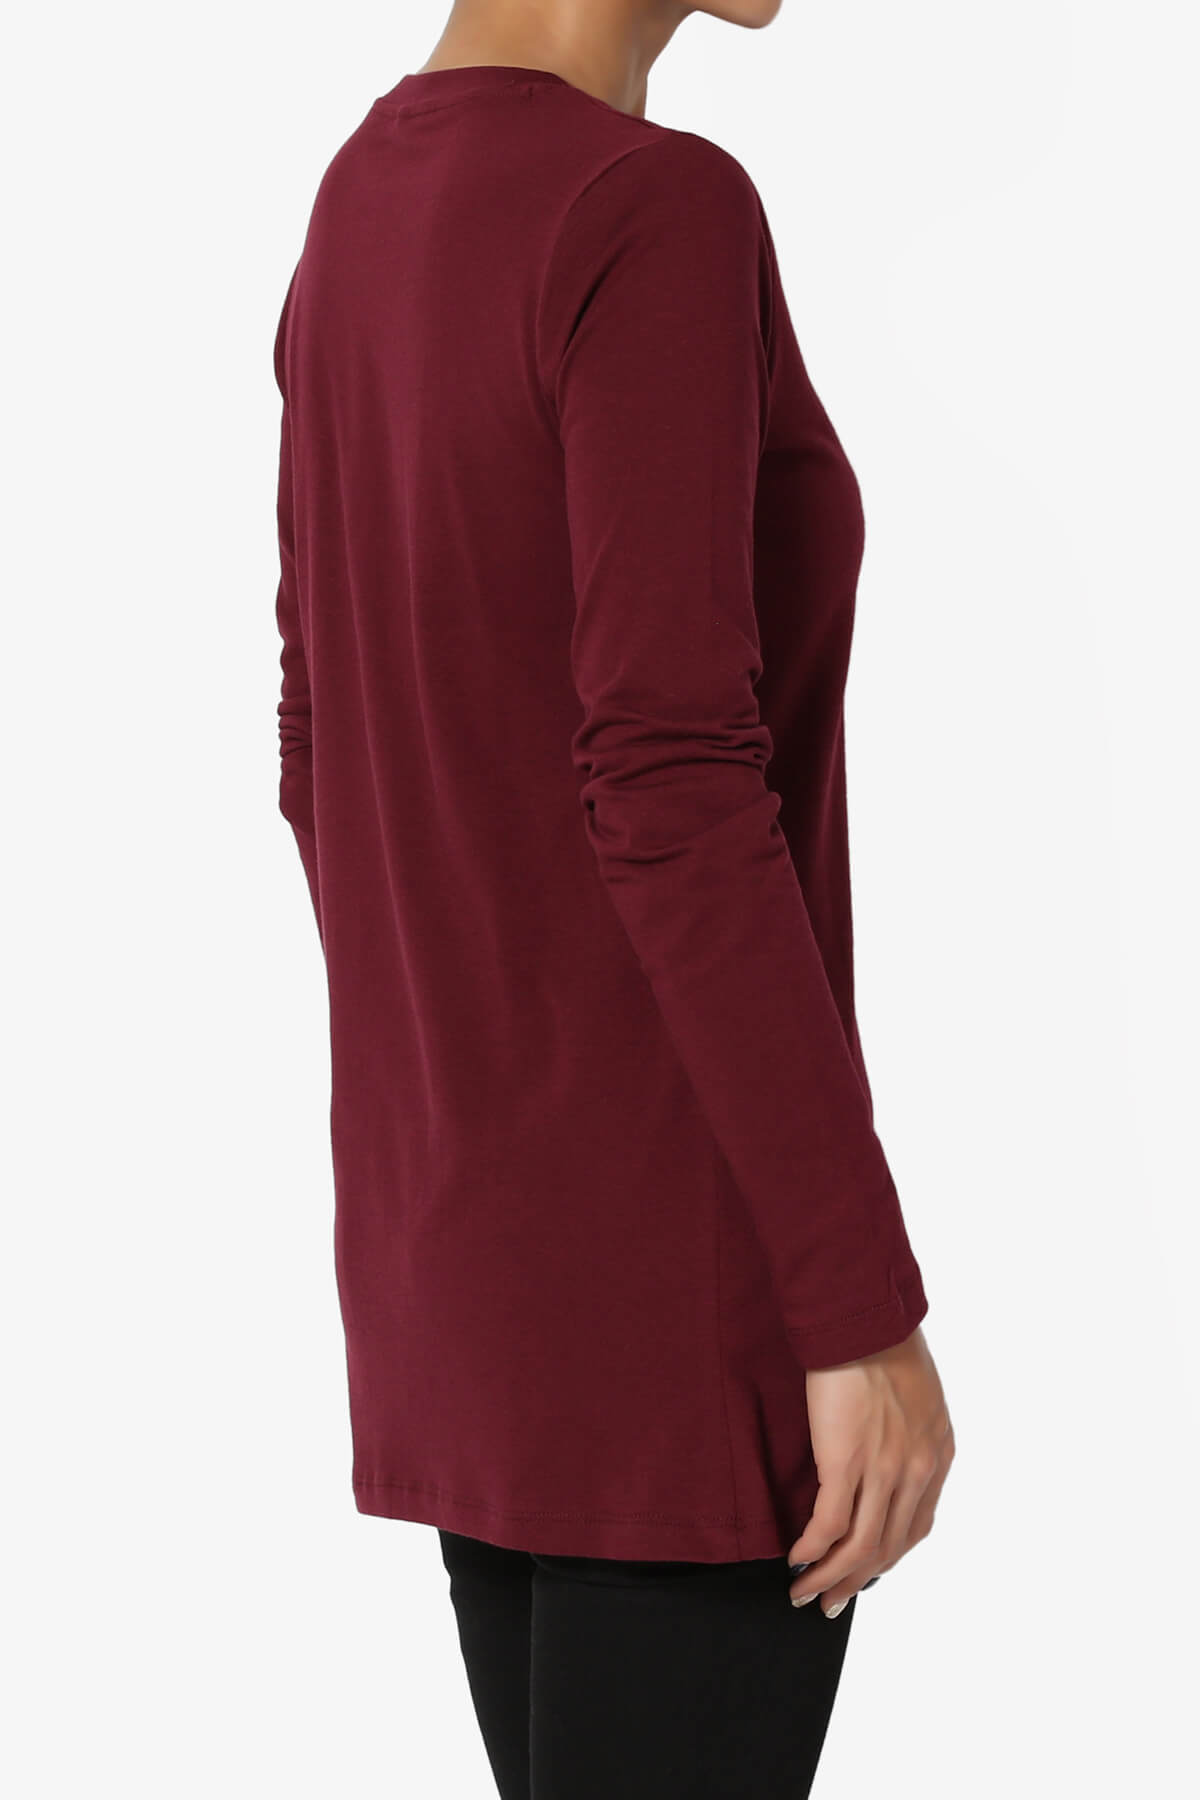 Load image into Gallery viewer, Lasso Cotton Crew Neck Long Sleeve T-Shirt DARK BURGUNDY_4
